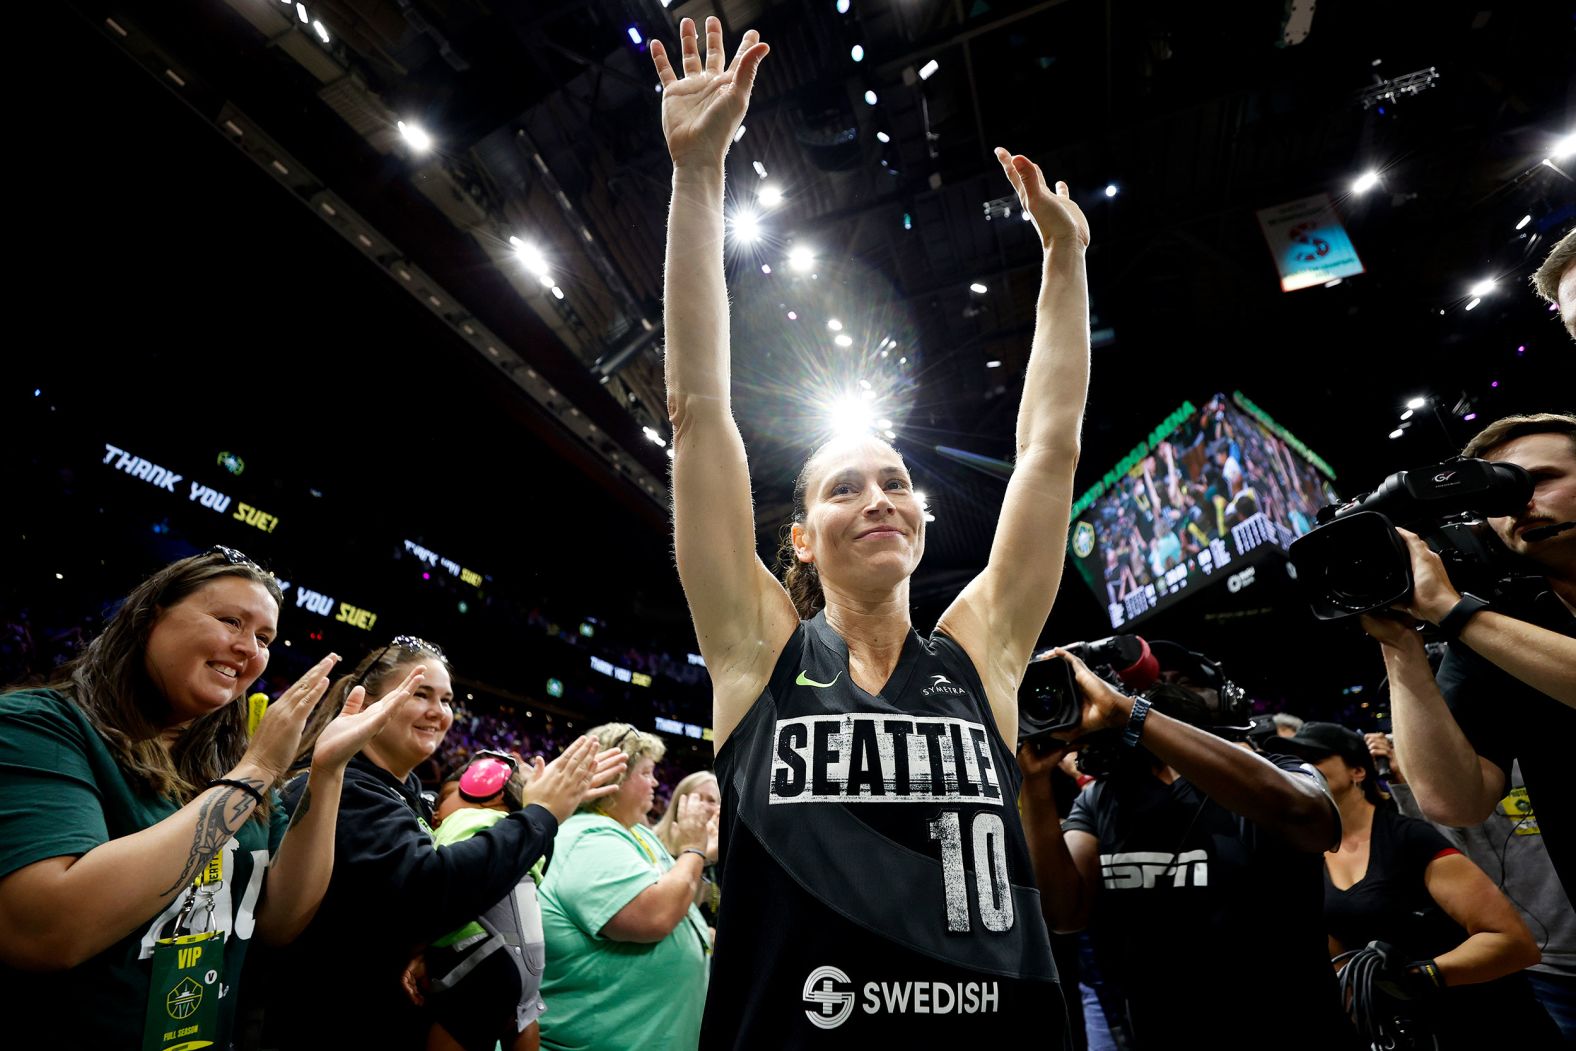 WNBA star Sue Bird waves to fans in Seattle after playing the last regular-season home game of her career on Sunday, August 7. Bird, one of the best women's basketball players in history, is retiring after this season.